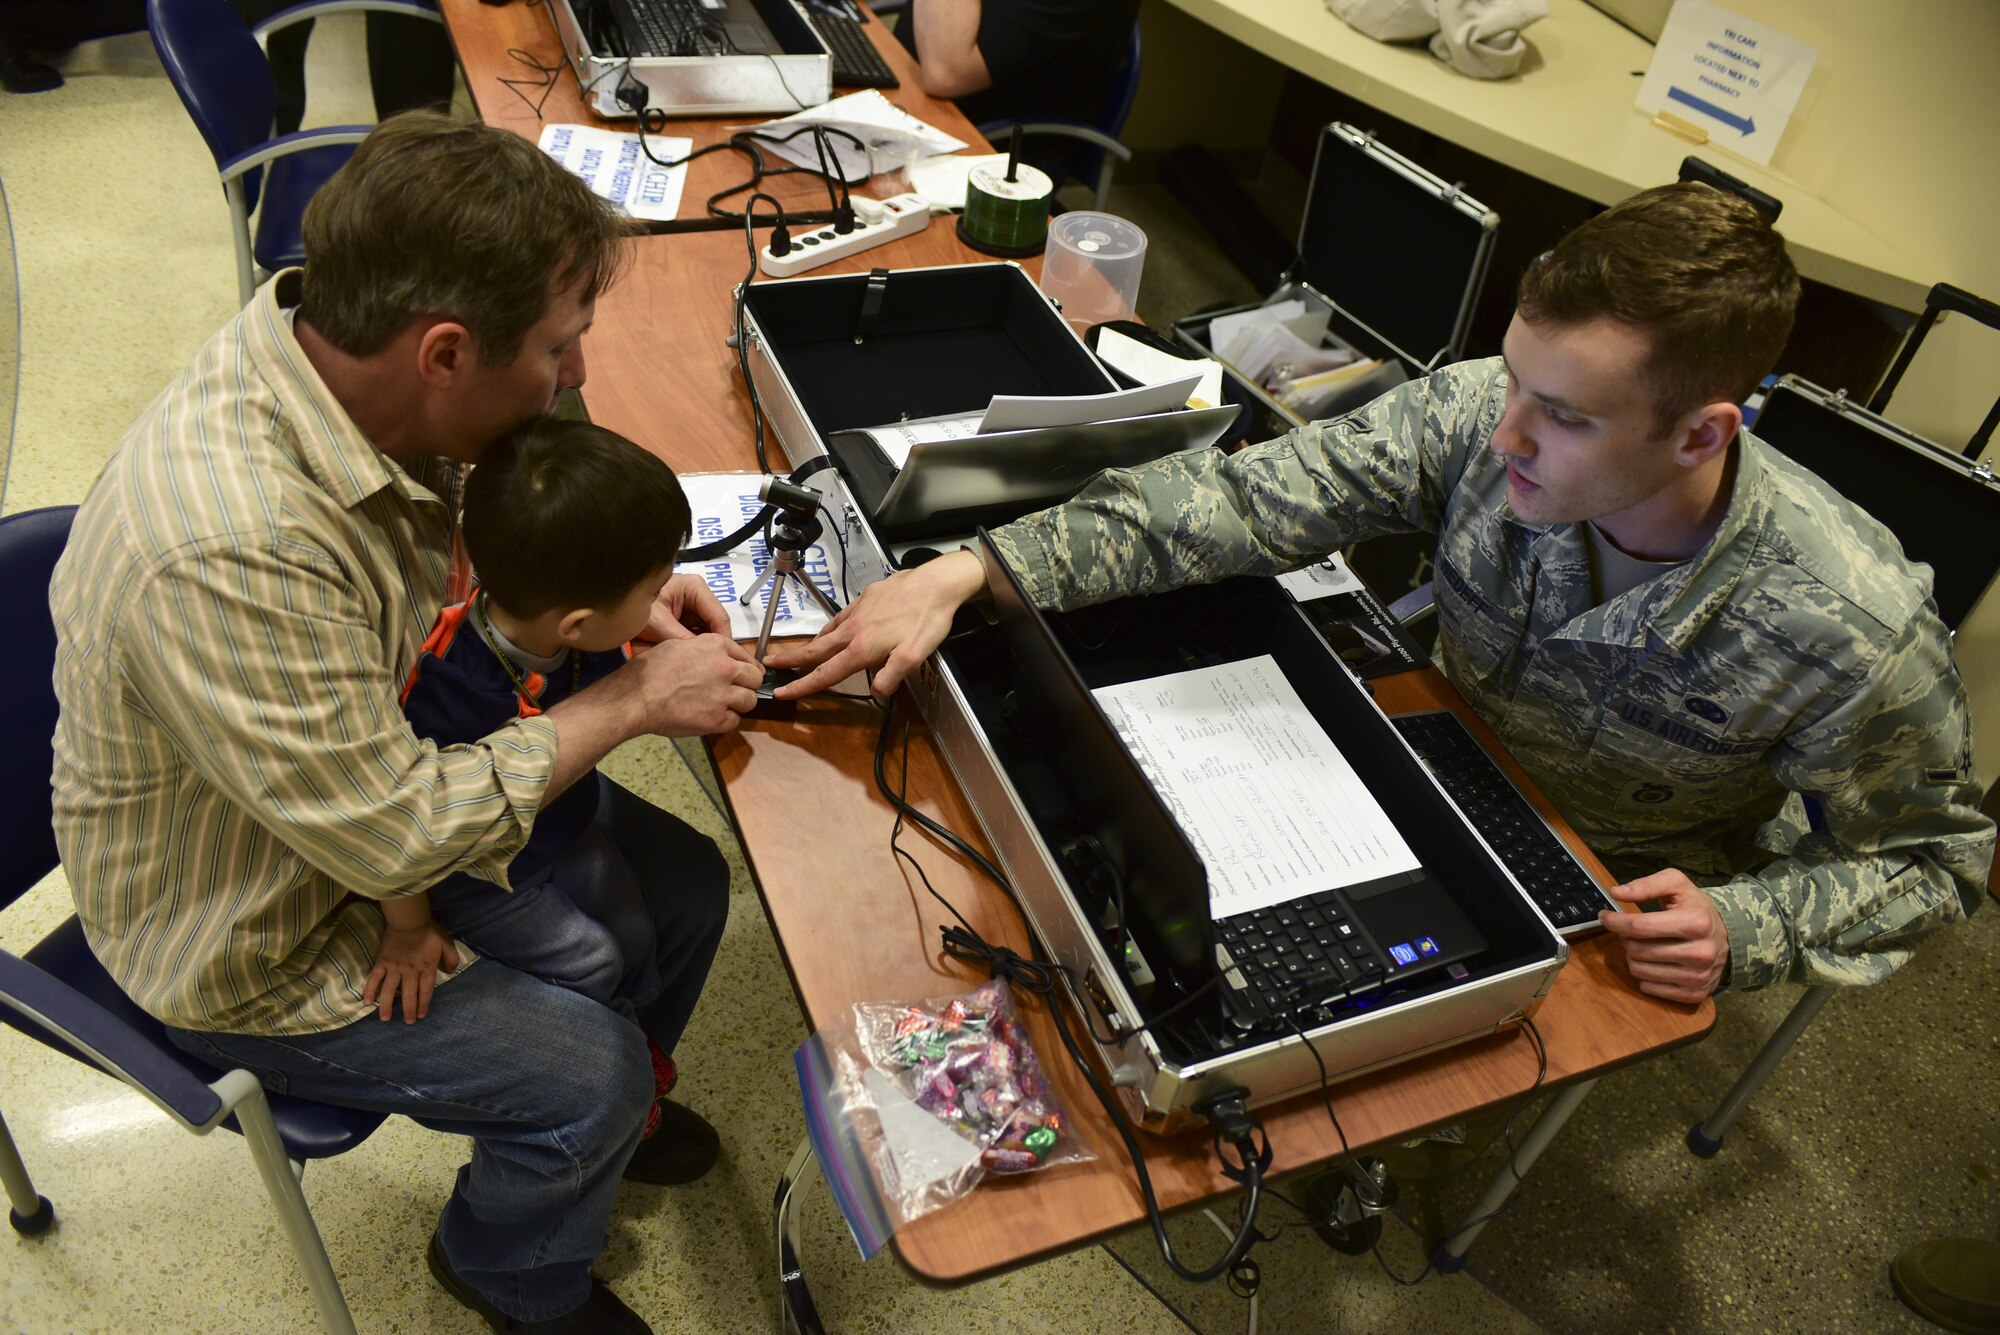 Steven Romehildt helps his son, Paul, scan his fingerprint during the 2017 Children’s Fair inside the 28th Medical Group at Ellsworth Air Force Base, S.D., April 20, 2017. Parents received a child-identification kit to help law enforcement find their child if they were to become lost. (U.S. Air Force photo by Airman 1st Class Randahl J. Jenson) 